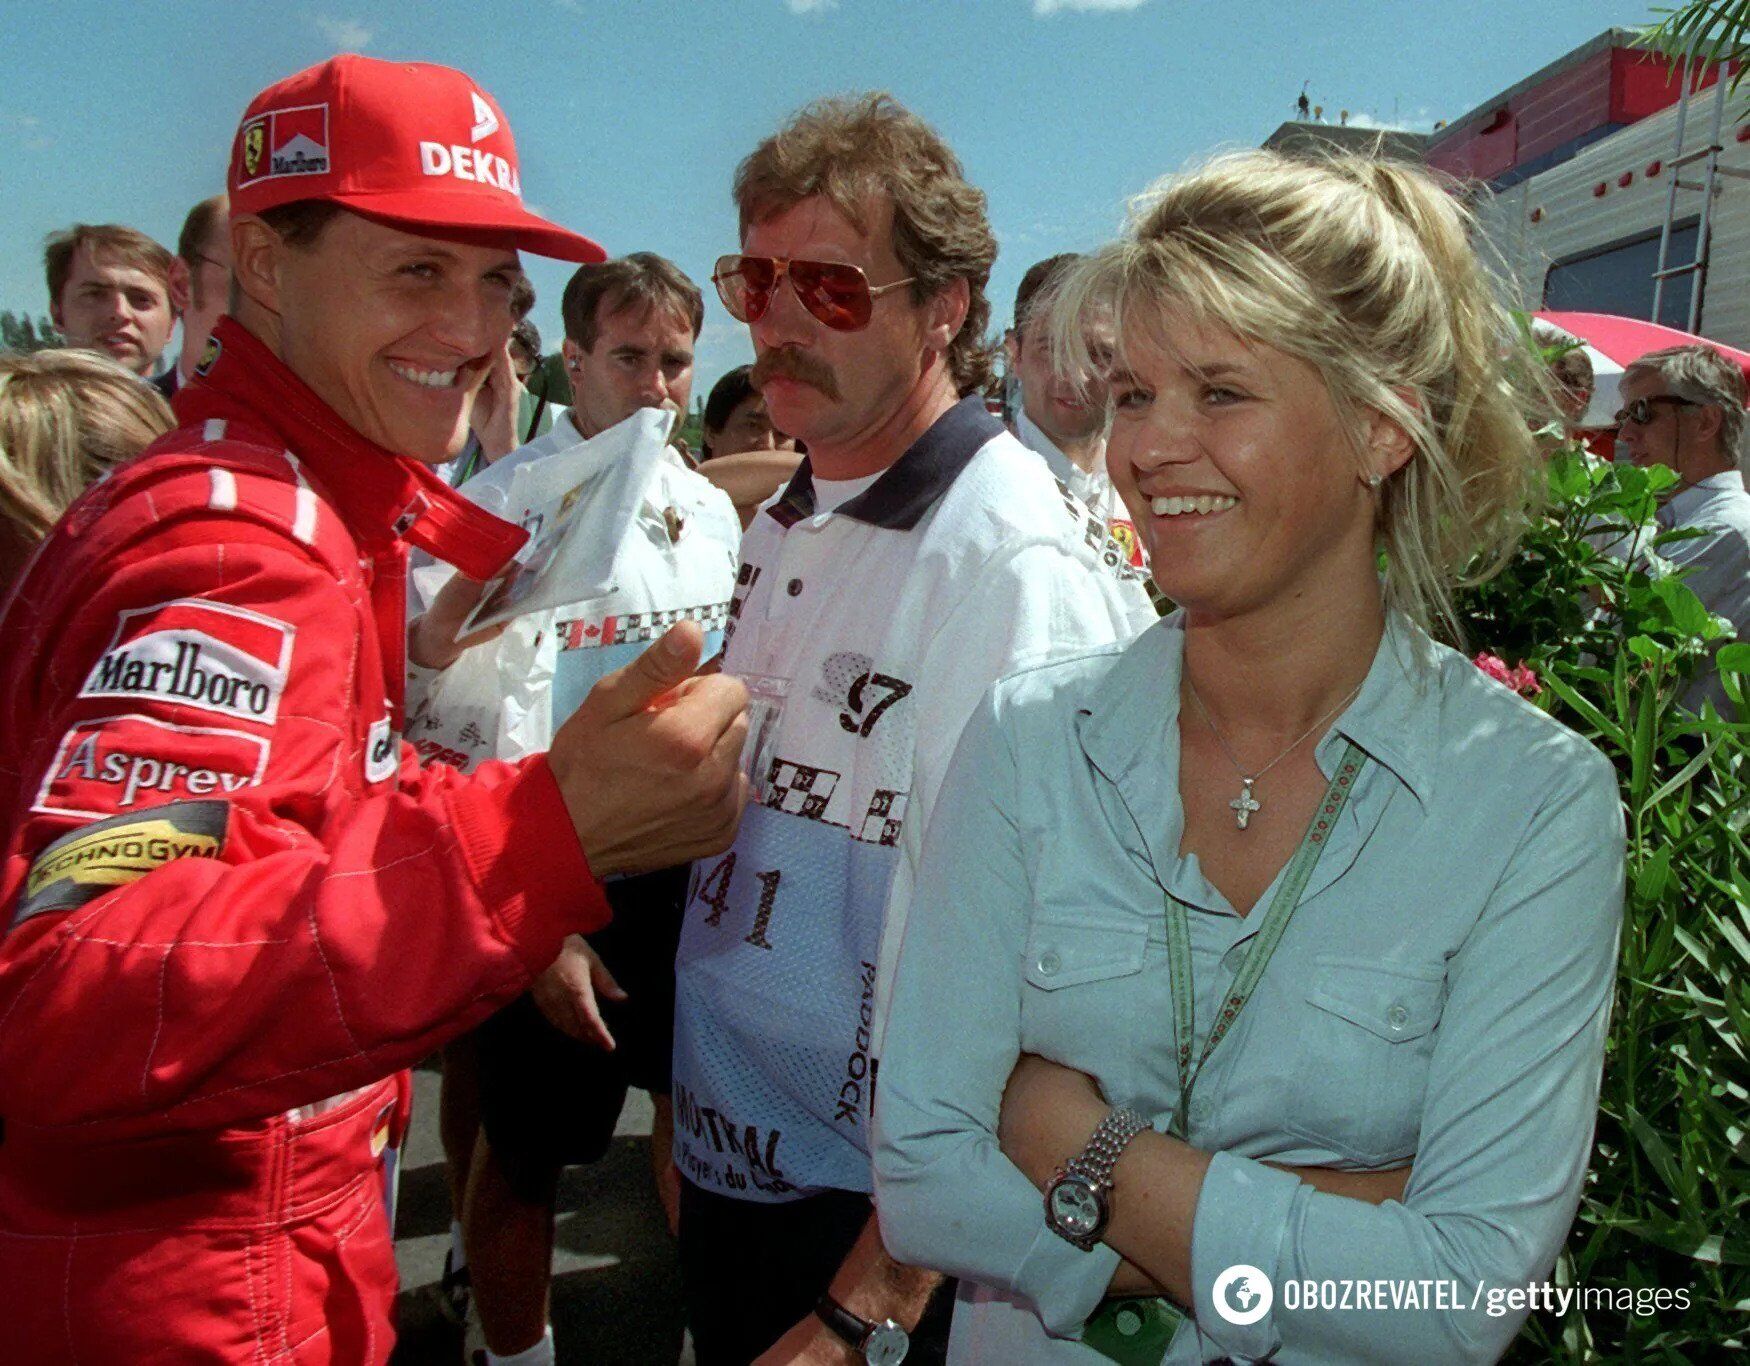 ''It will never be like it was before''. News about Michael Schumacher's condition